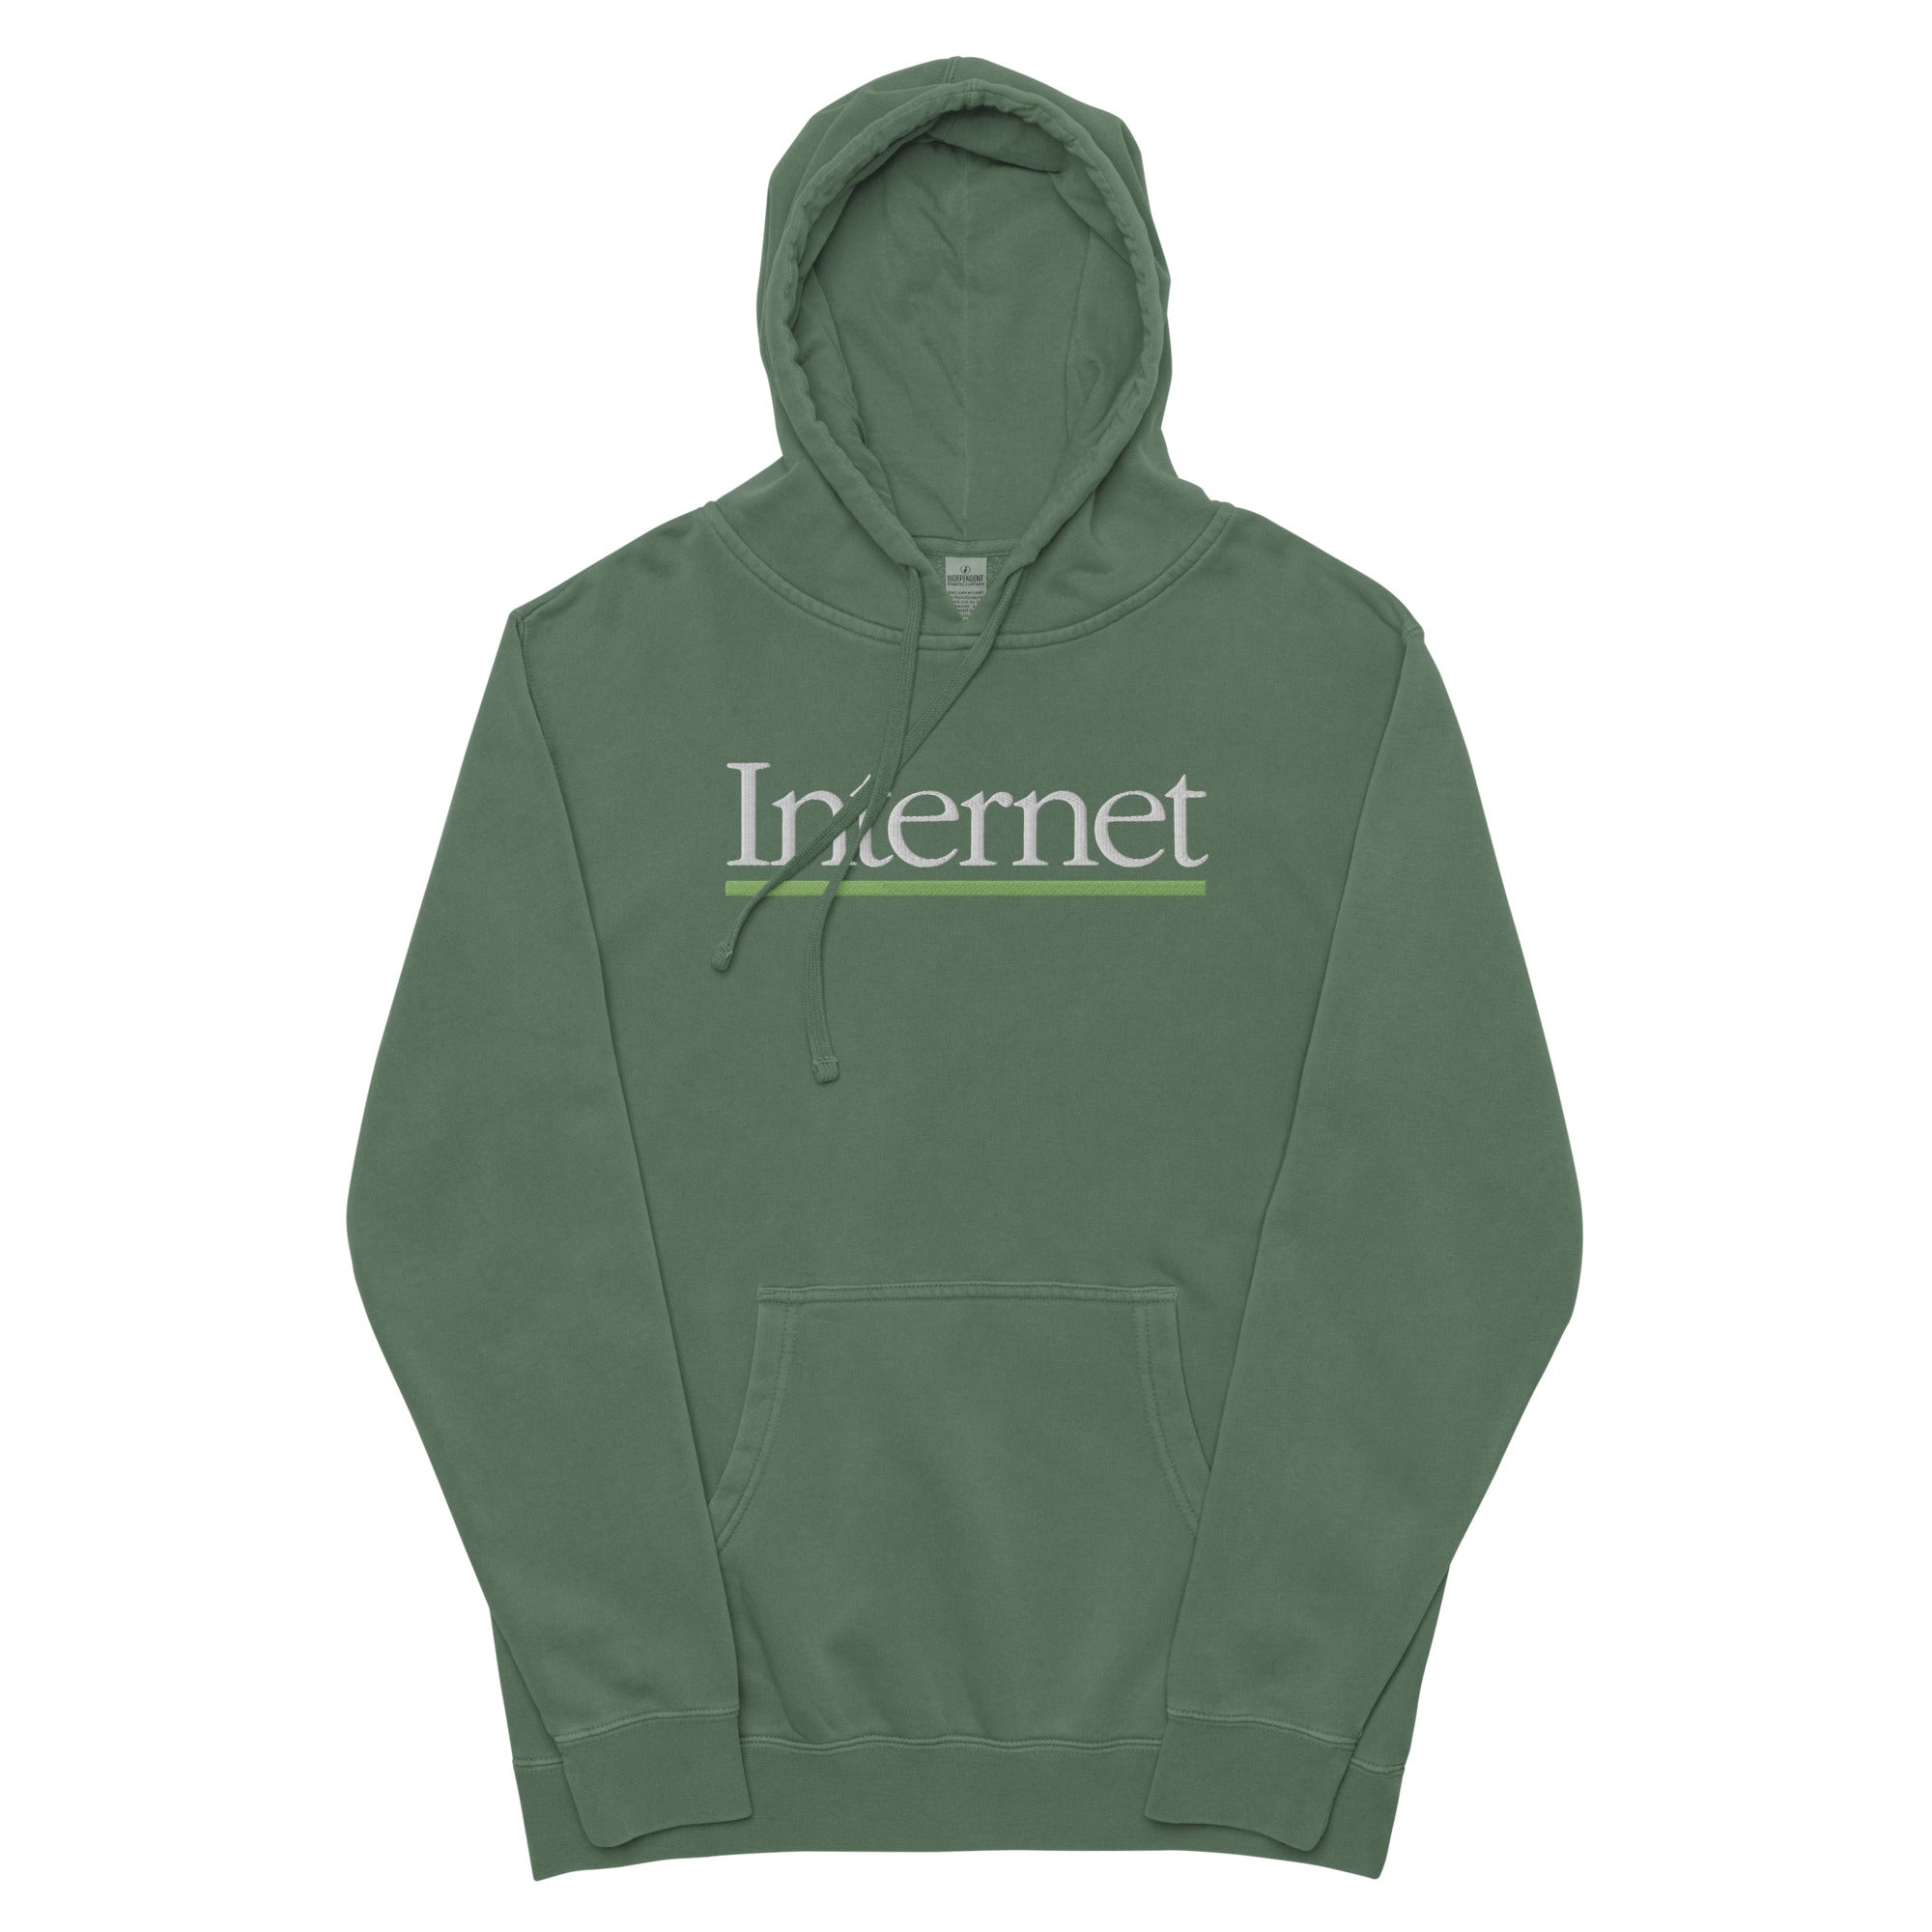 Internet embroidered pigment-dyed hoodie